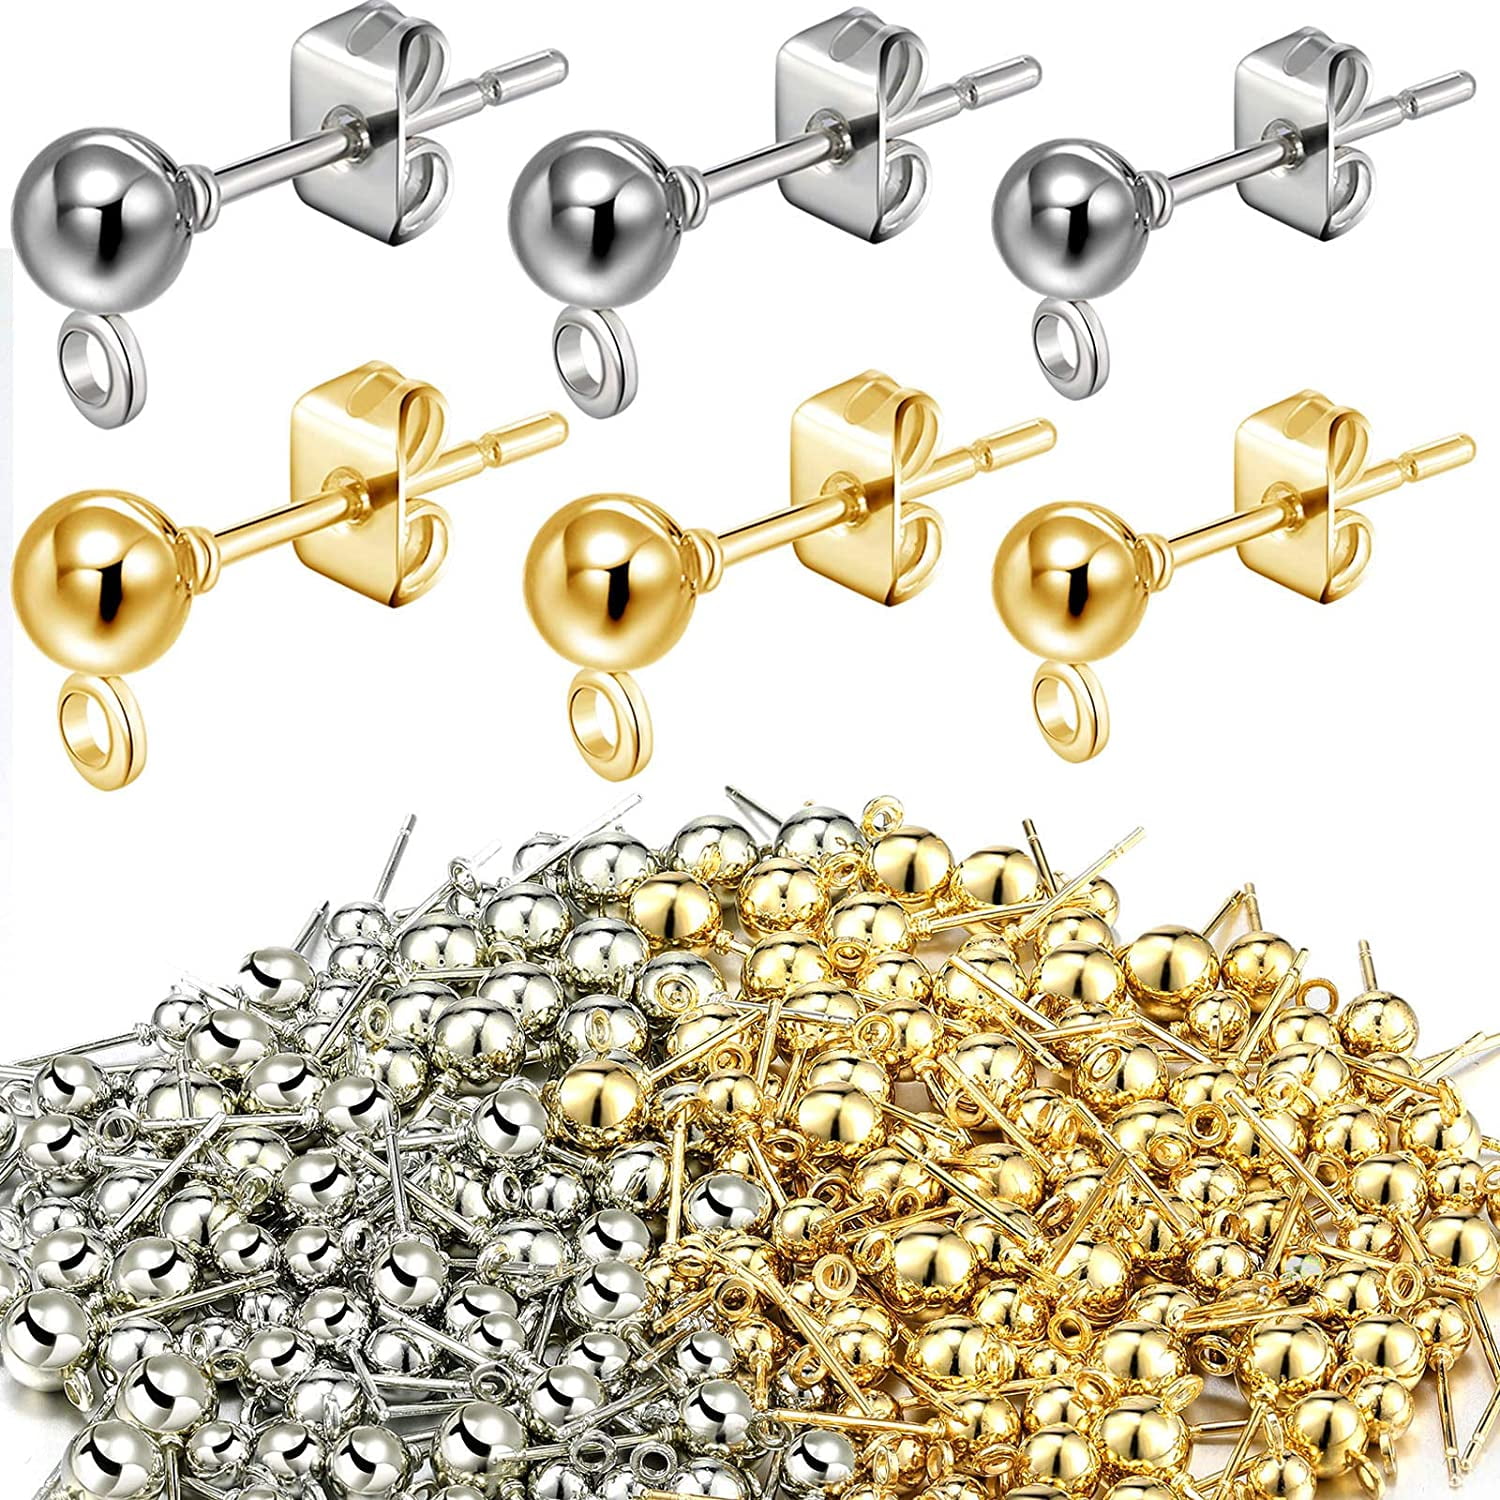 12pcs/Set Silver Earring Back Replacements, Hypoallergenic Earring Backs  For Stud Earrings, Safety Locking Lugs For Earrings Nuts, Butterfly Earrings  Backs For Studs Locking Earrings Back Lined Safety Lock, Valentine'S Day  Gift, Christmas